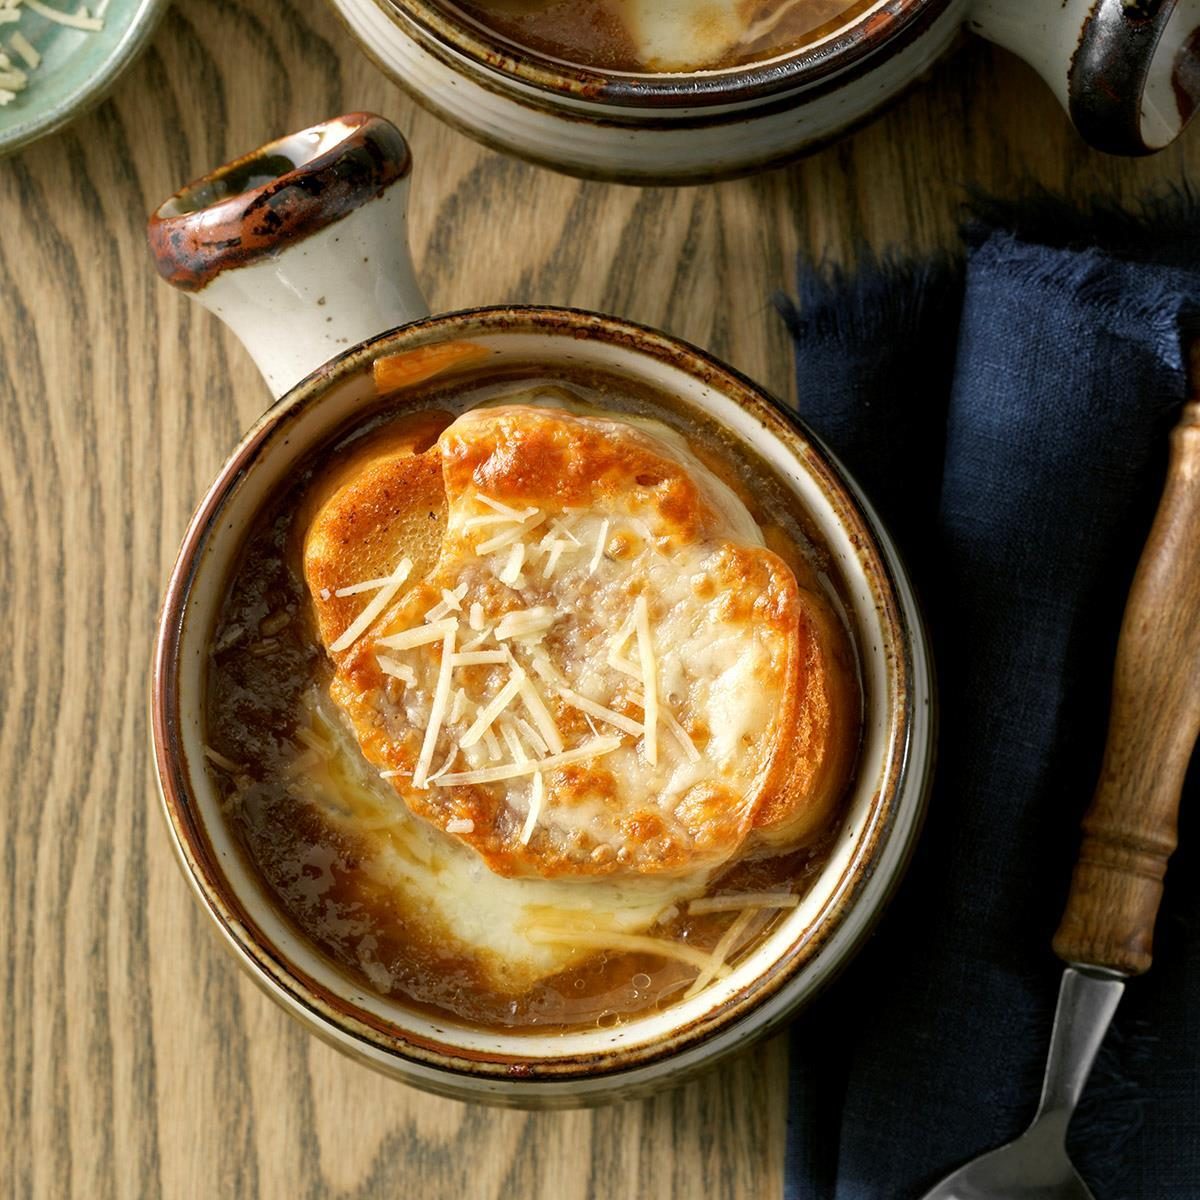 gourmet traveller french onion soup recipe